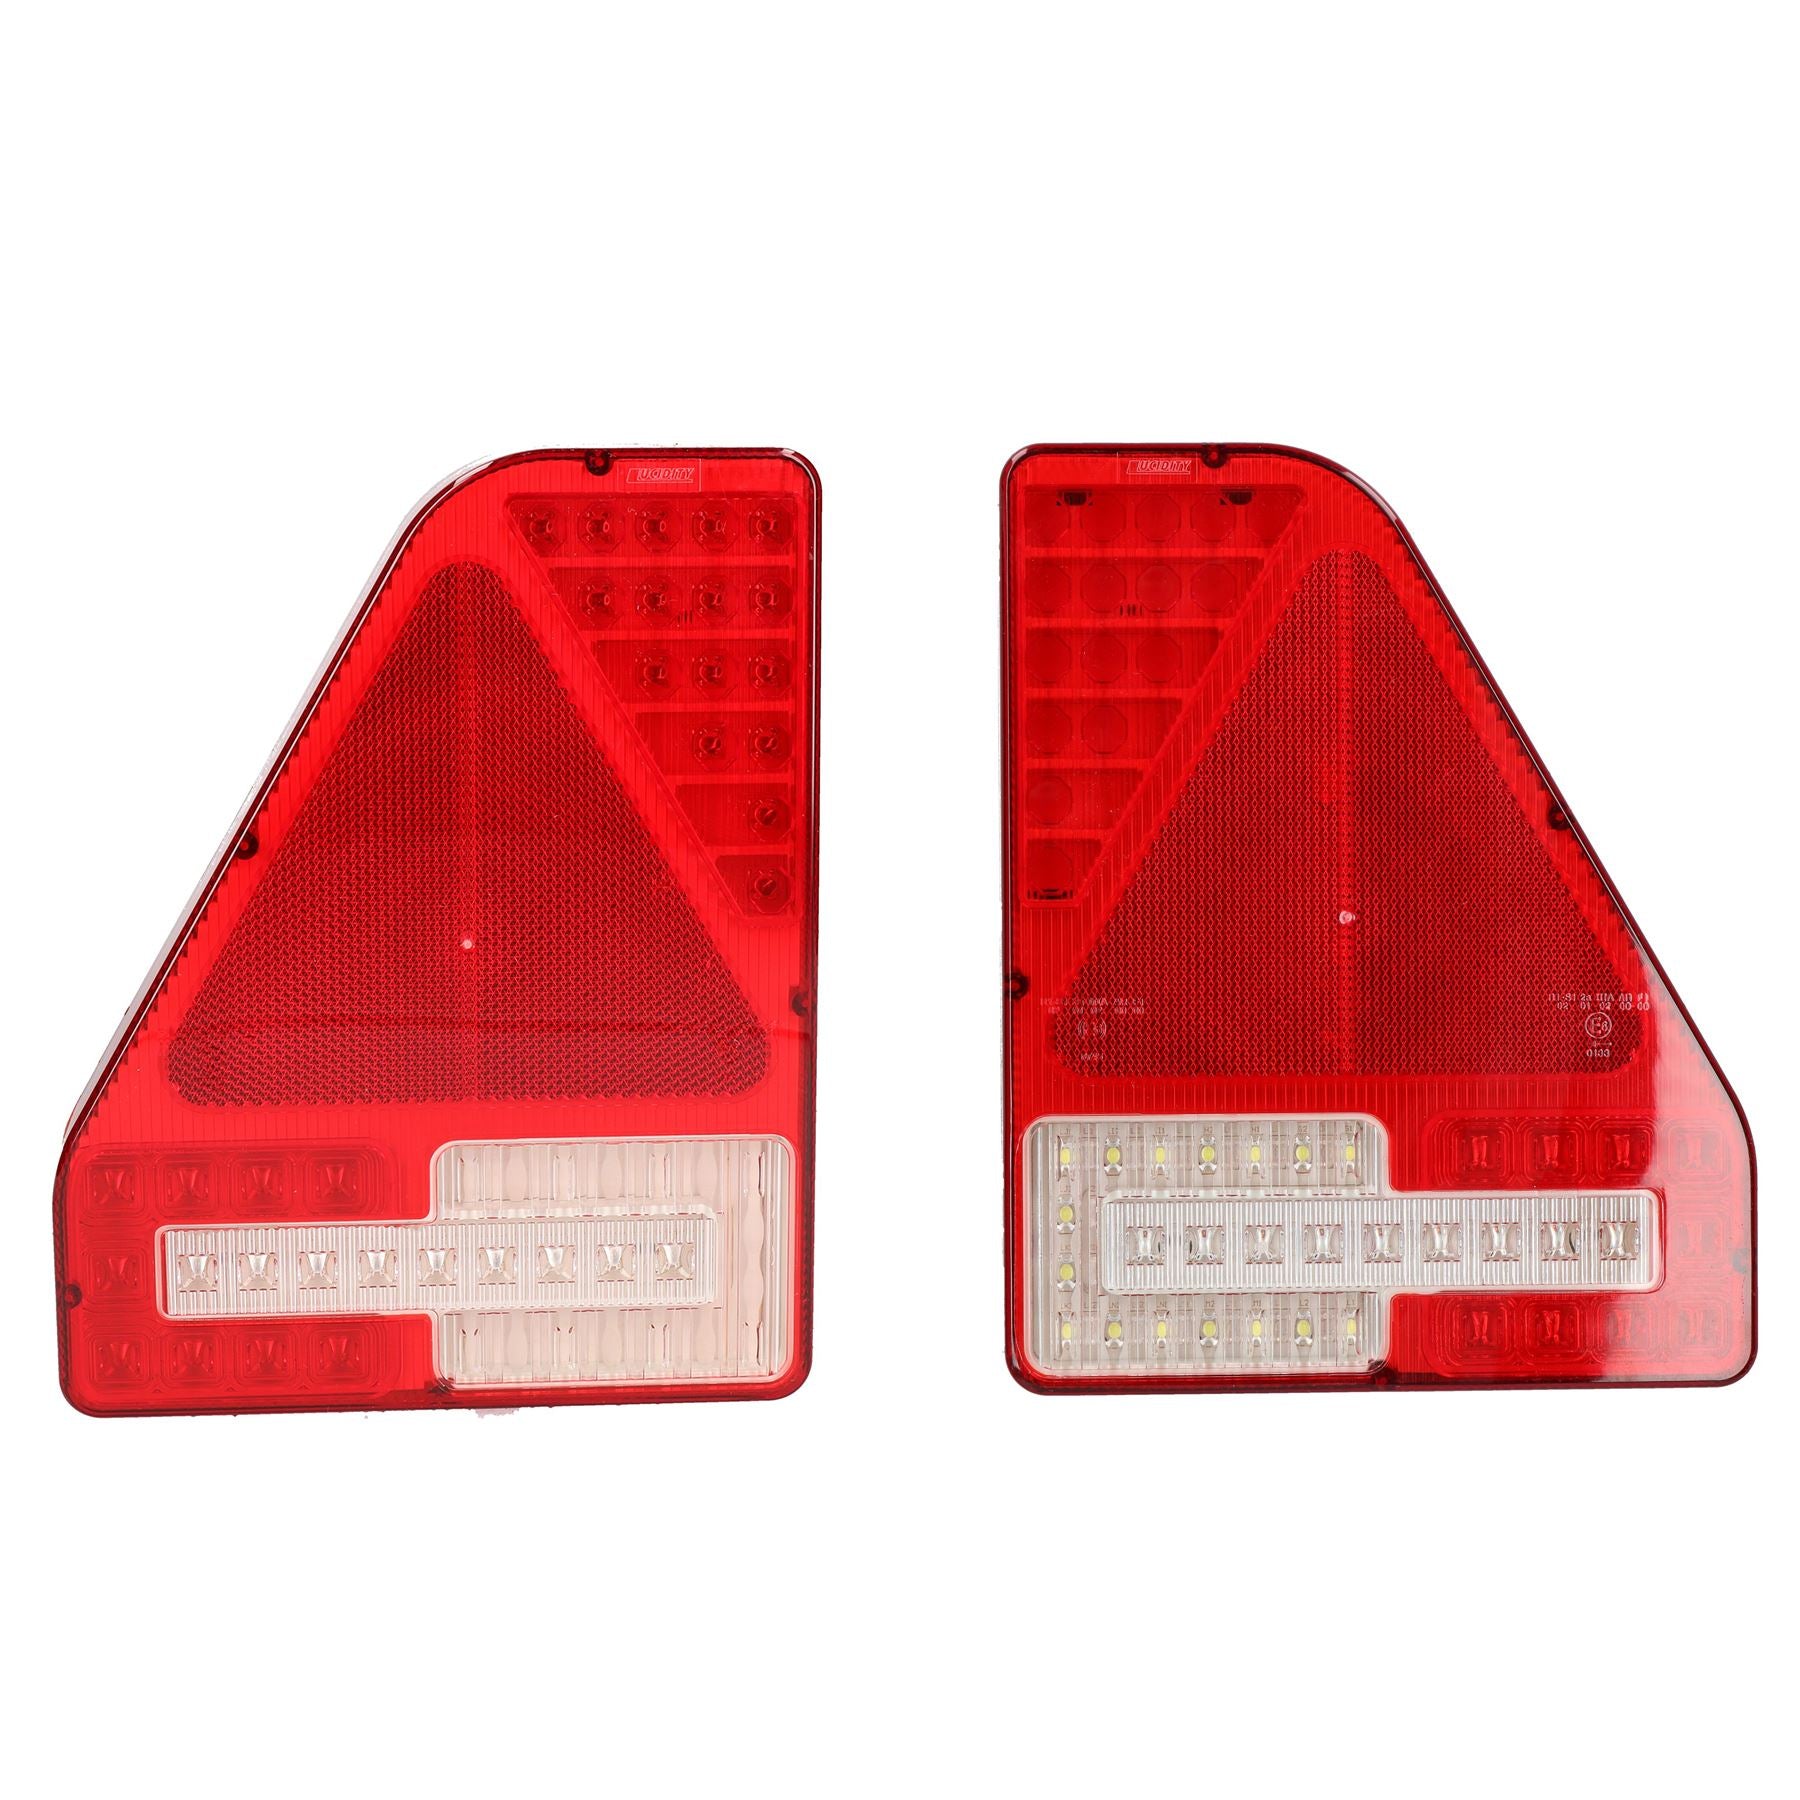 Indespension LED Rear Light Lamps PAIR for Euro Trailers with 5 Pin Plugs